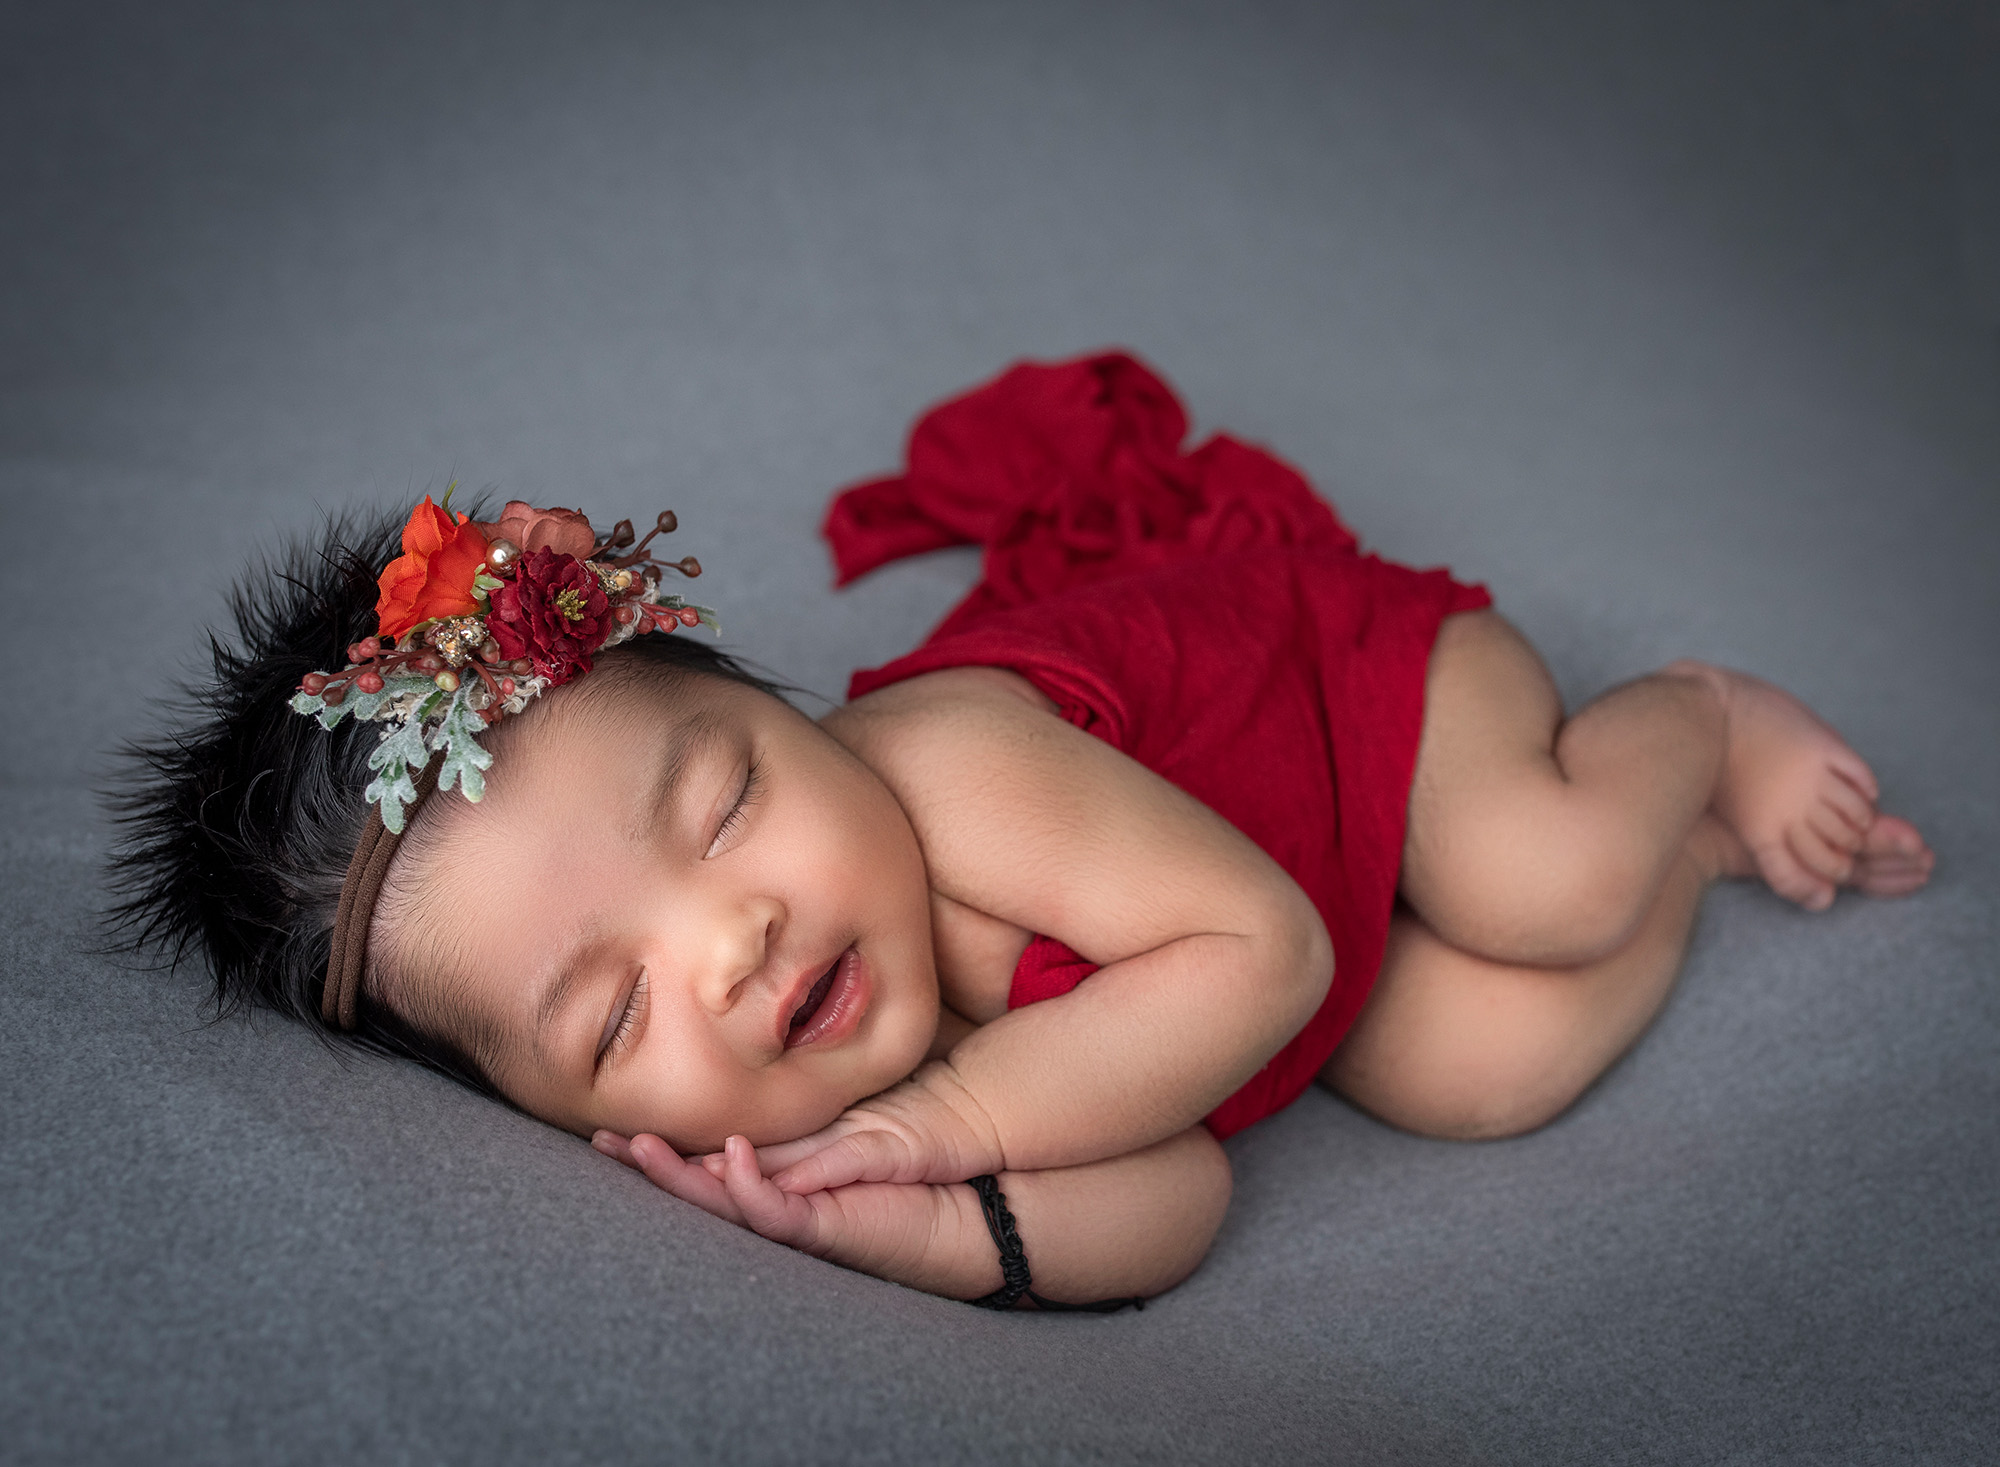 newborn baby girl asleep on her side happily smiling draped in red